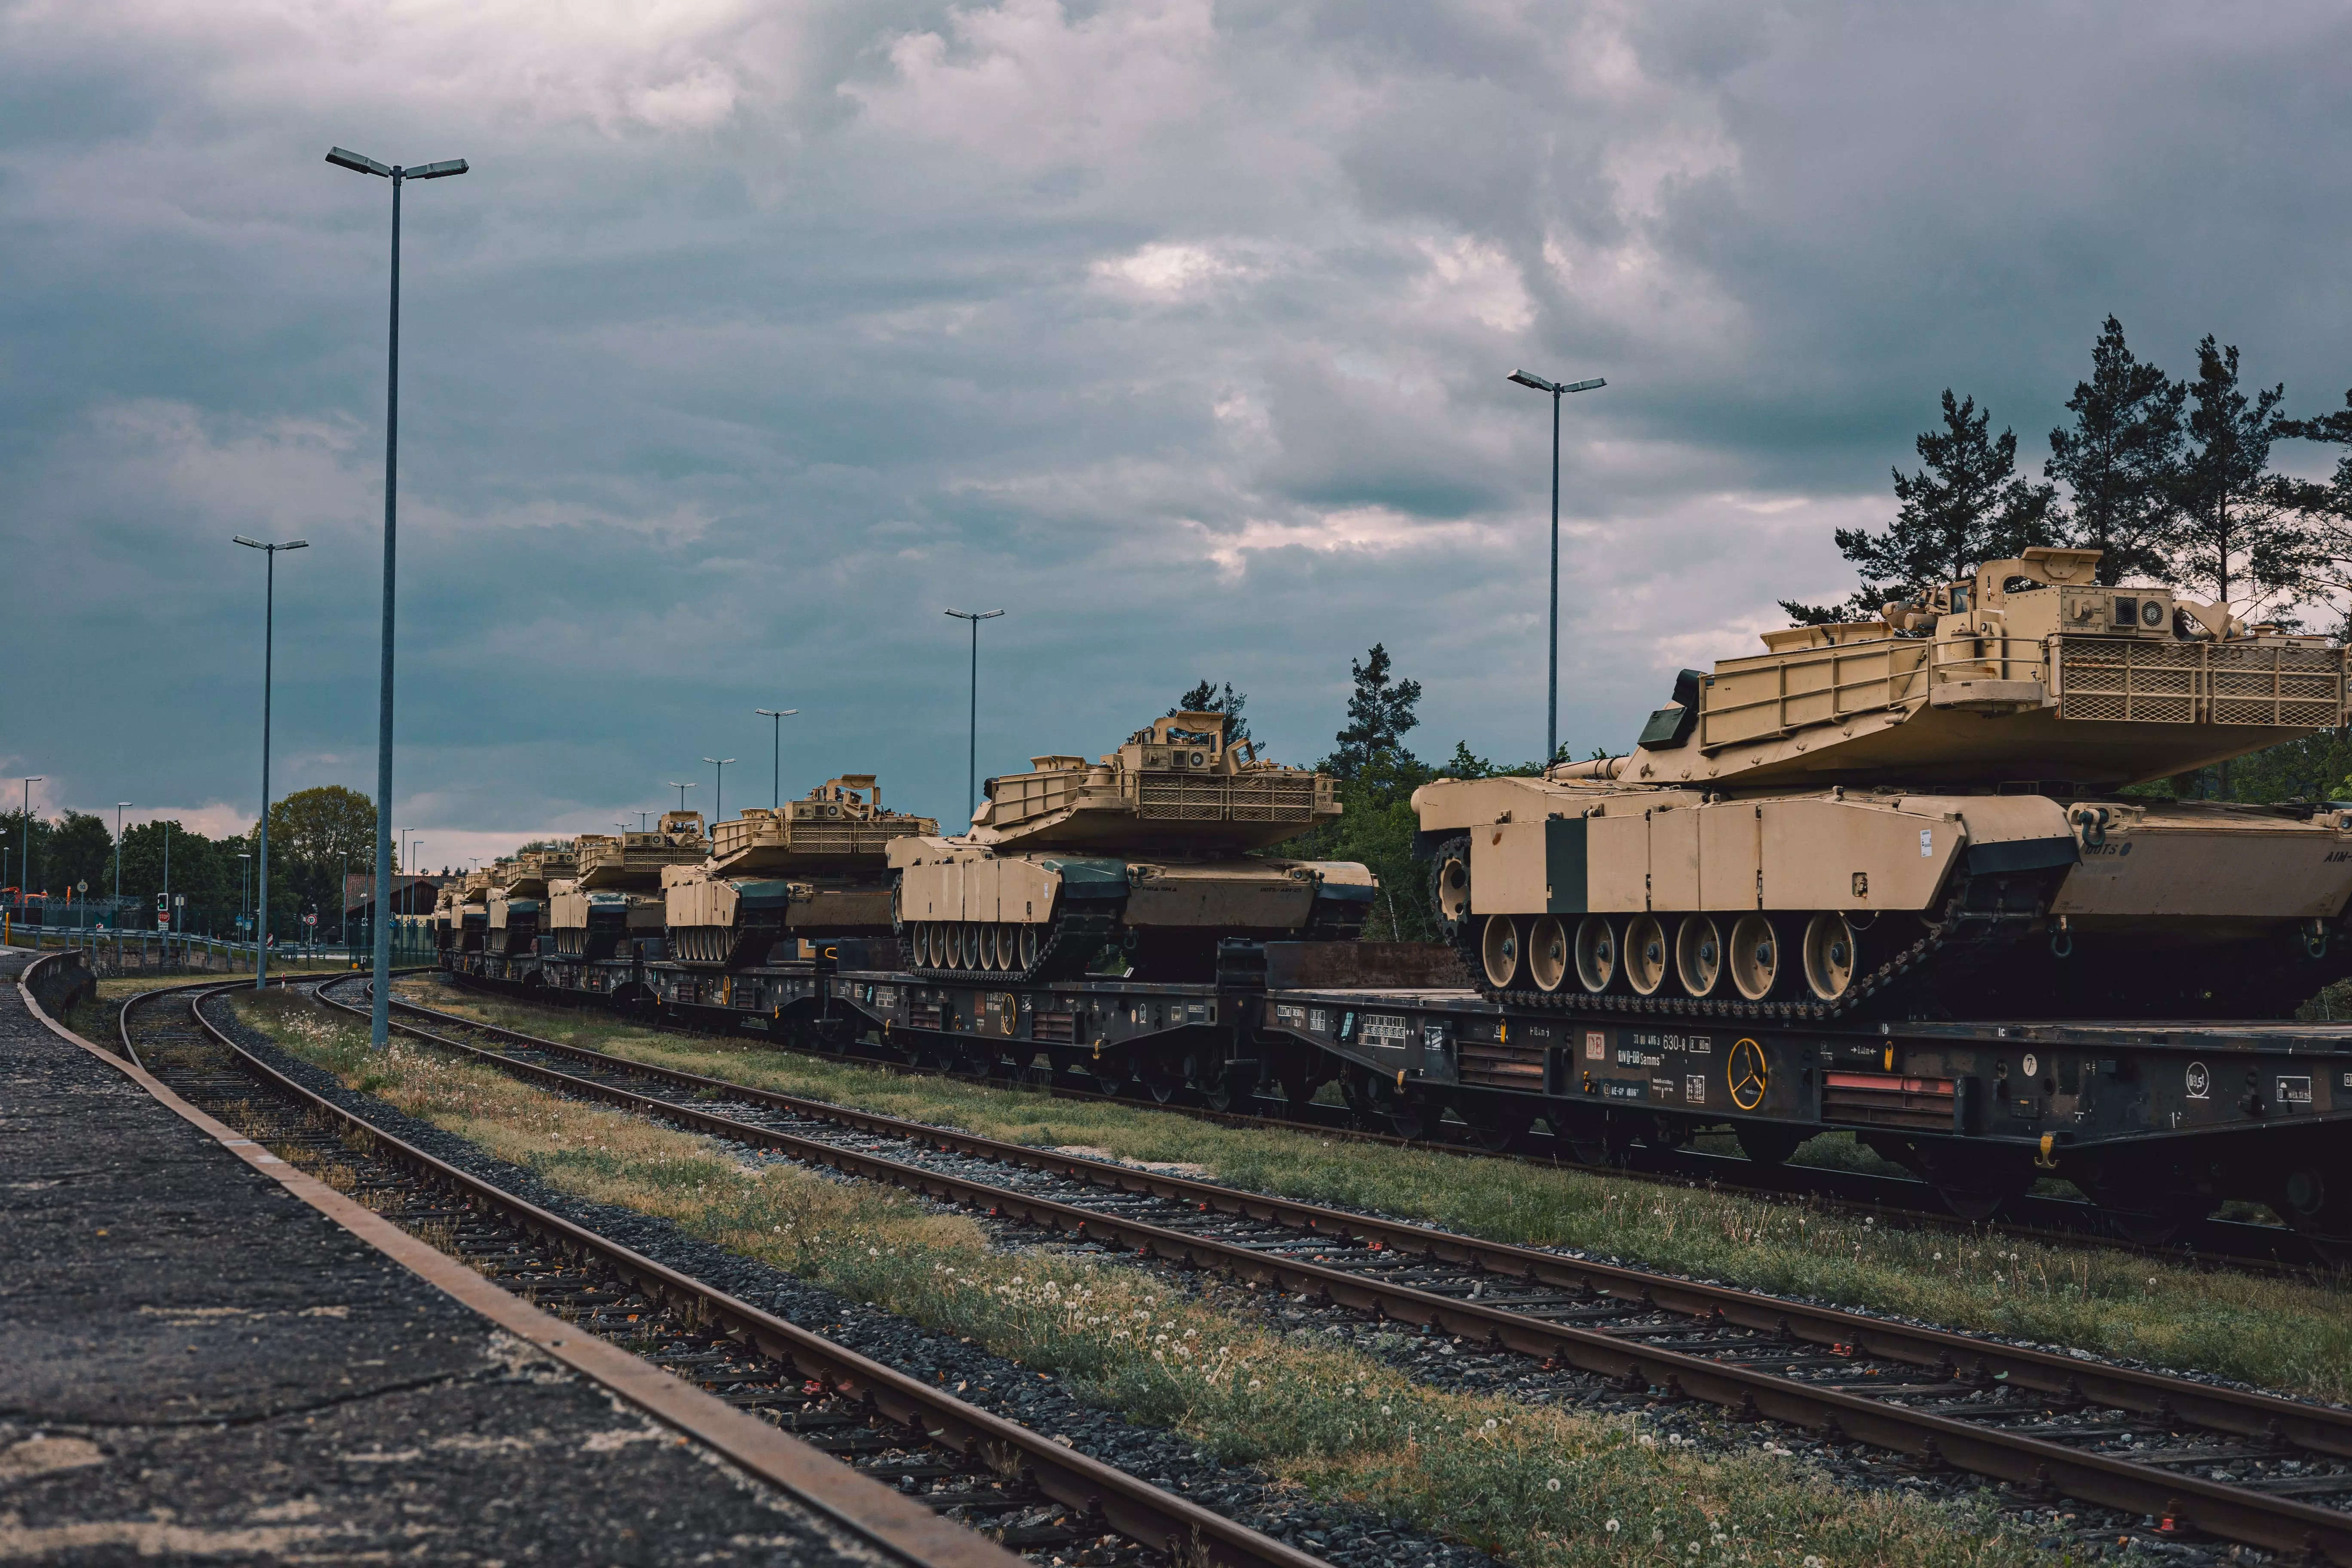 Tanks on rail carriages.